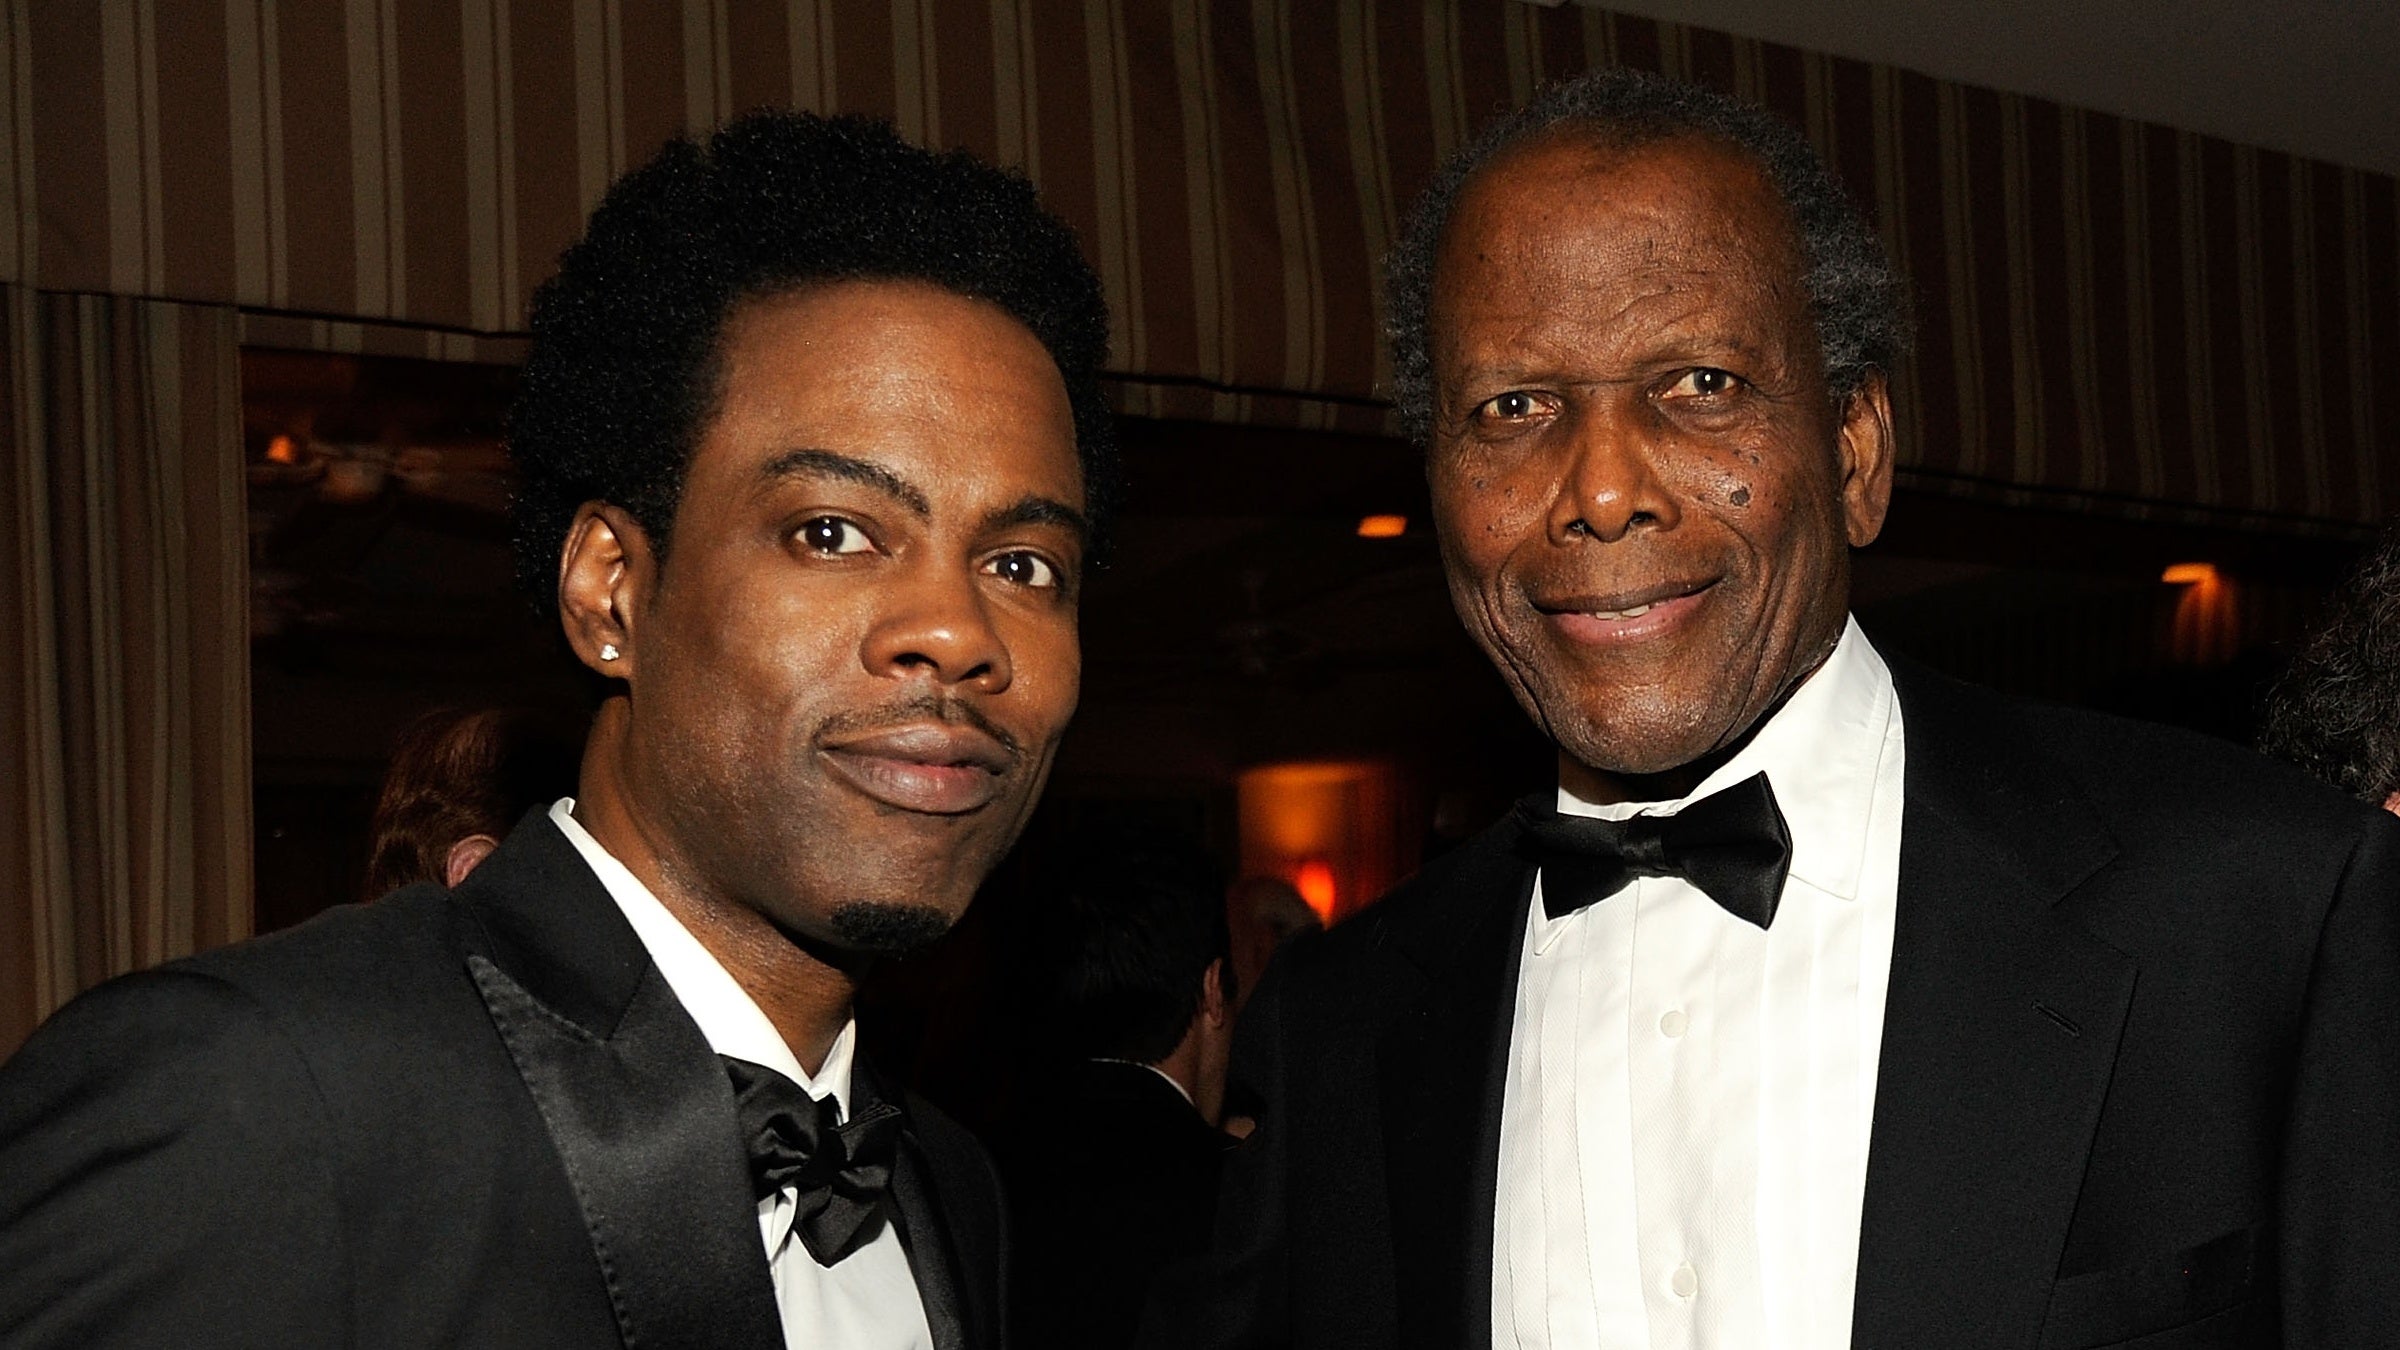 Denzel Washington, Oprah Winfrey, Harry Belafonte, and More Of Black Hollywood React to the Passing of Sidney Poitier